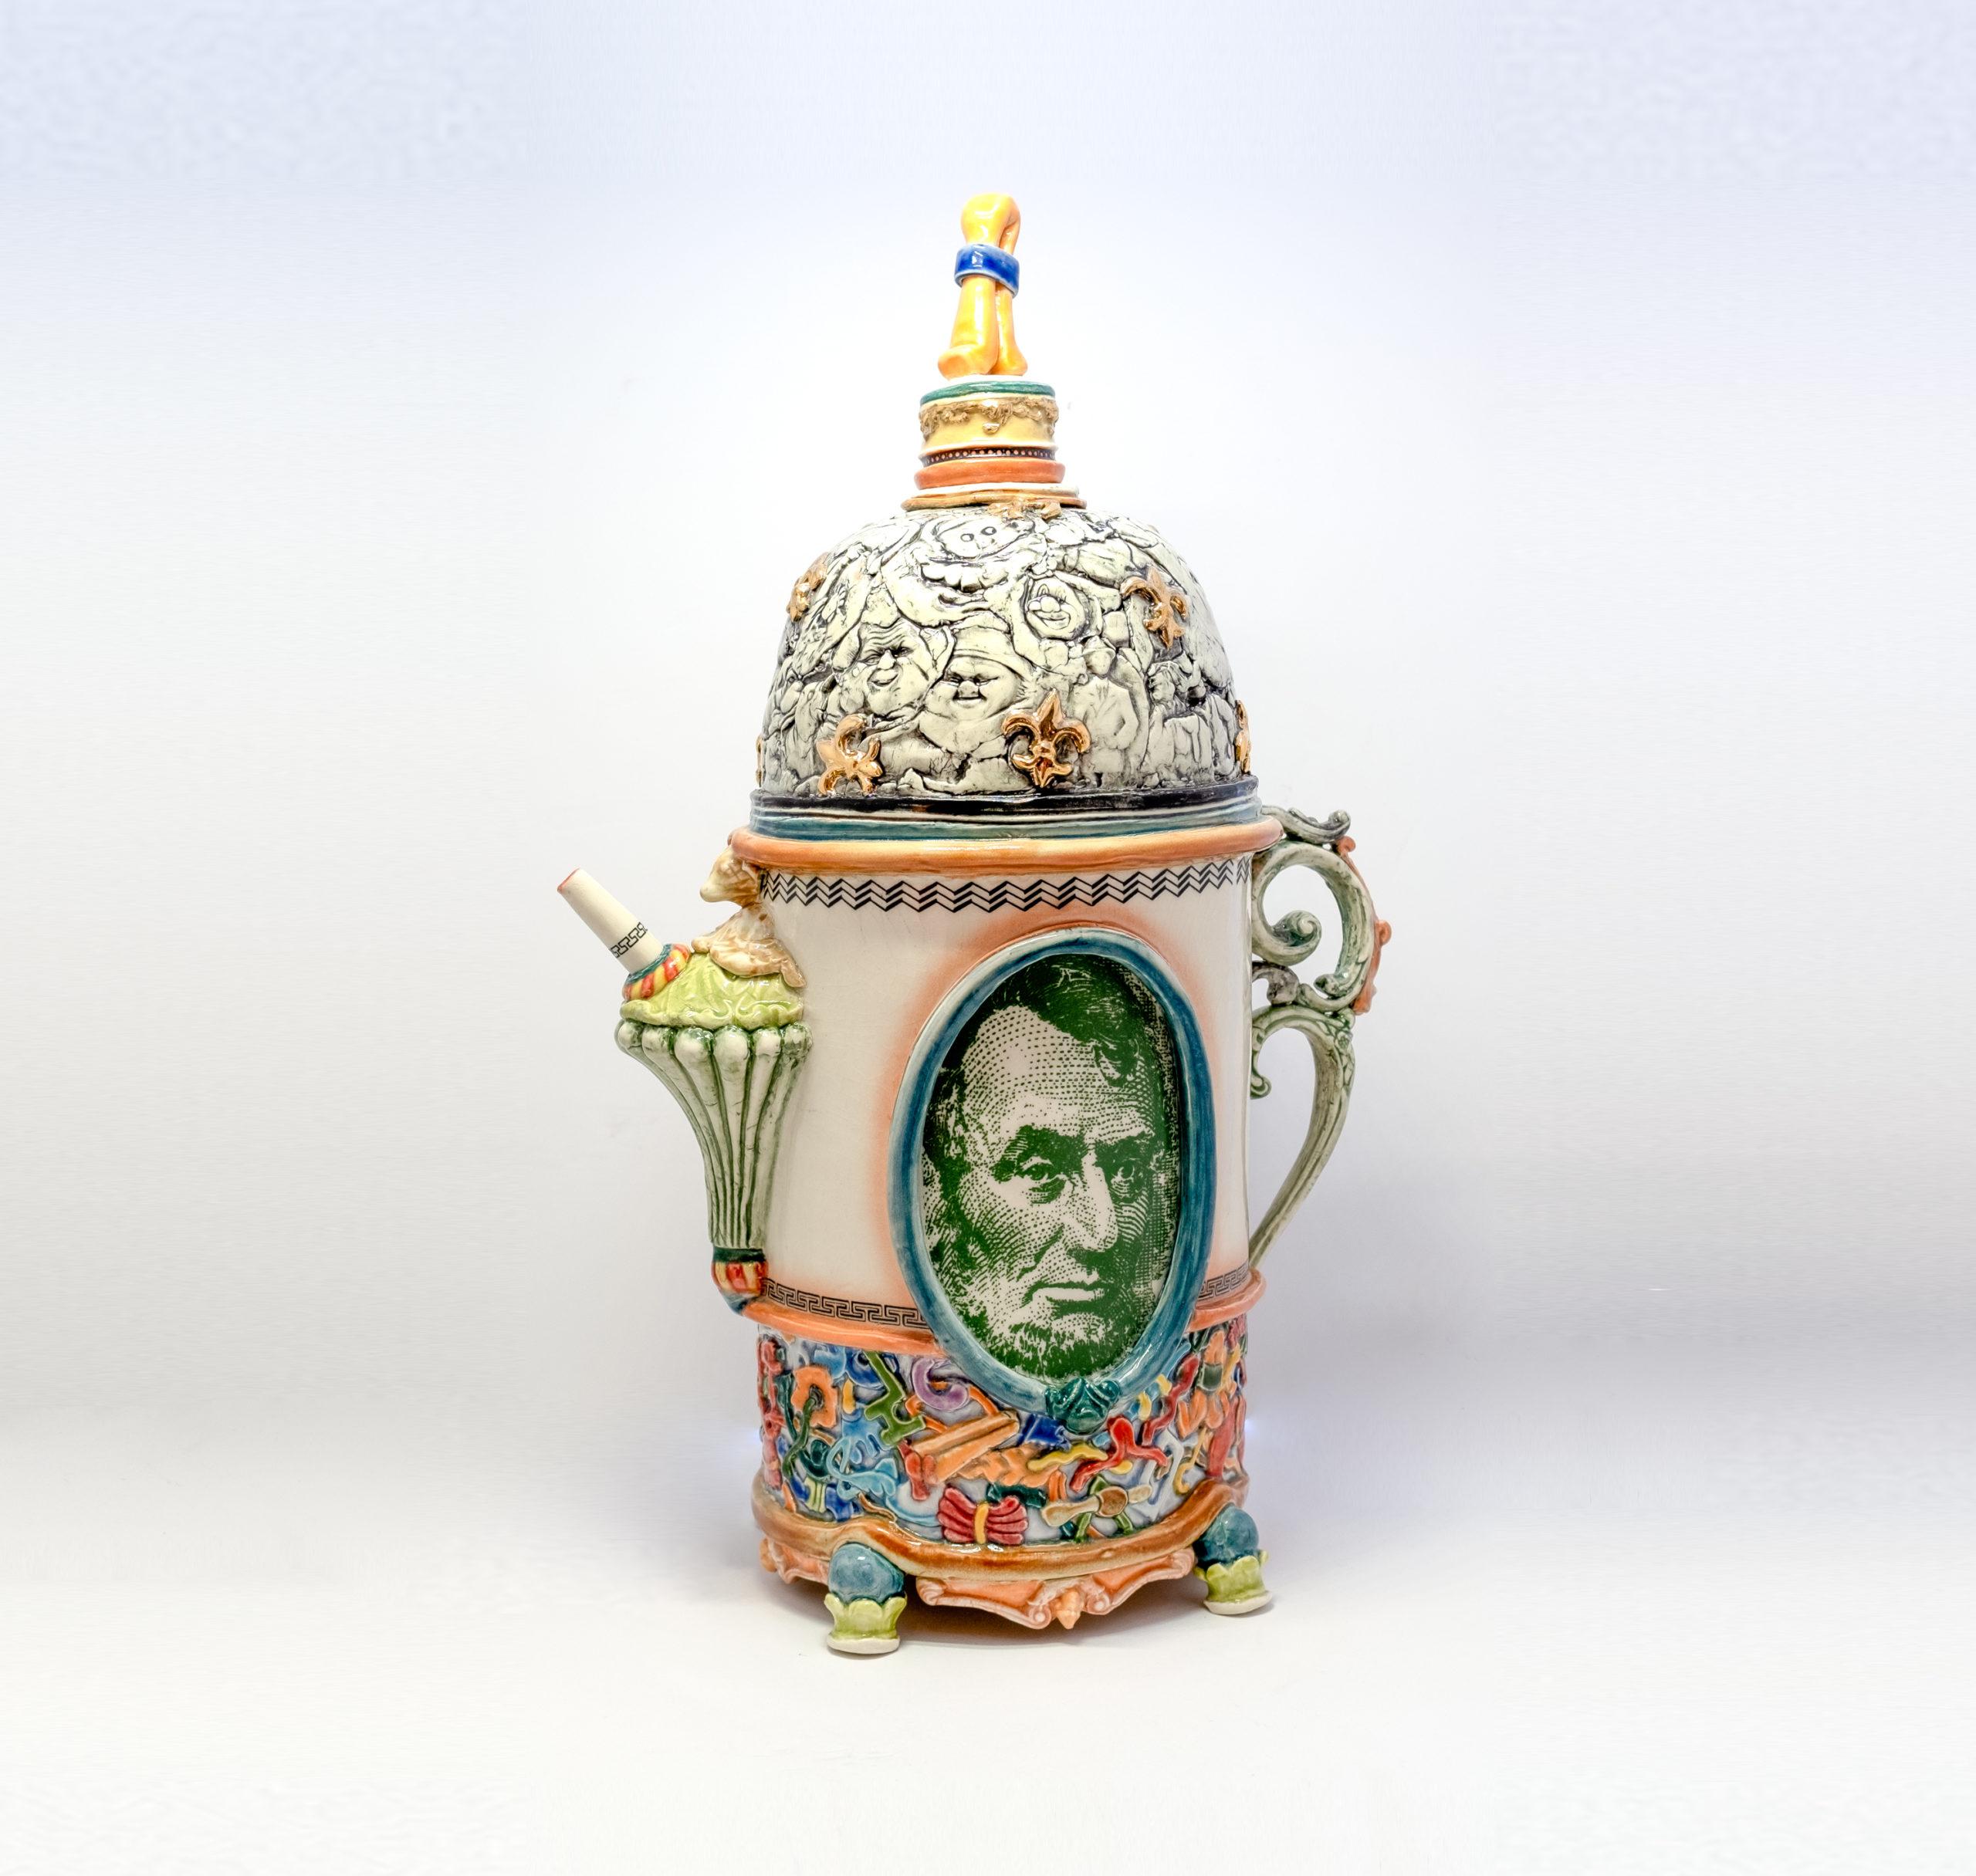 Americana Ceramic Teapot with Abraham Lincoln  - Art by Ron Carlson